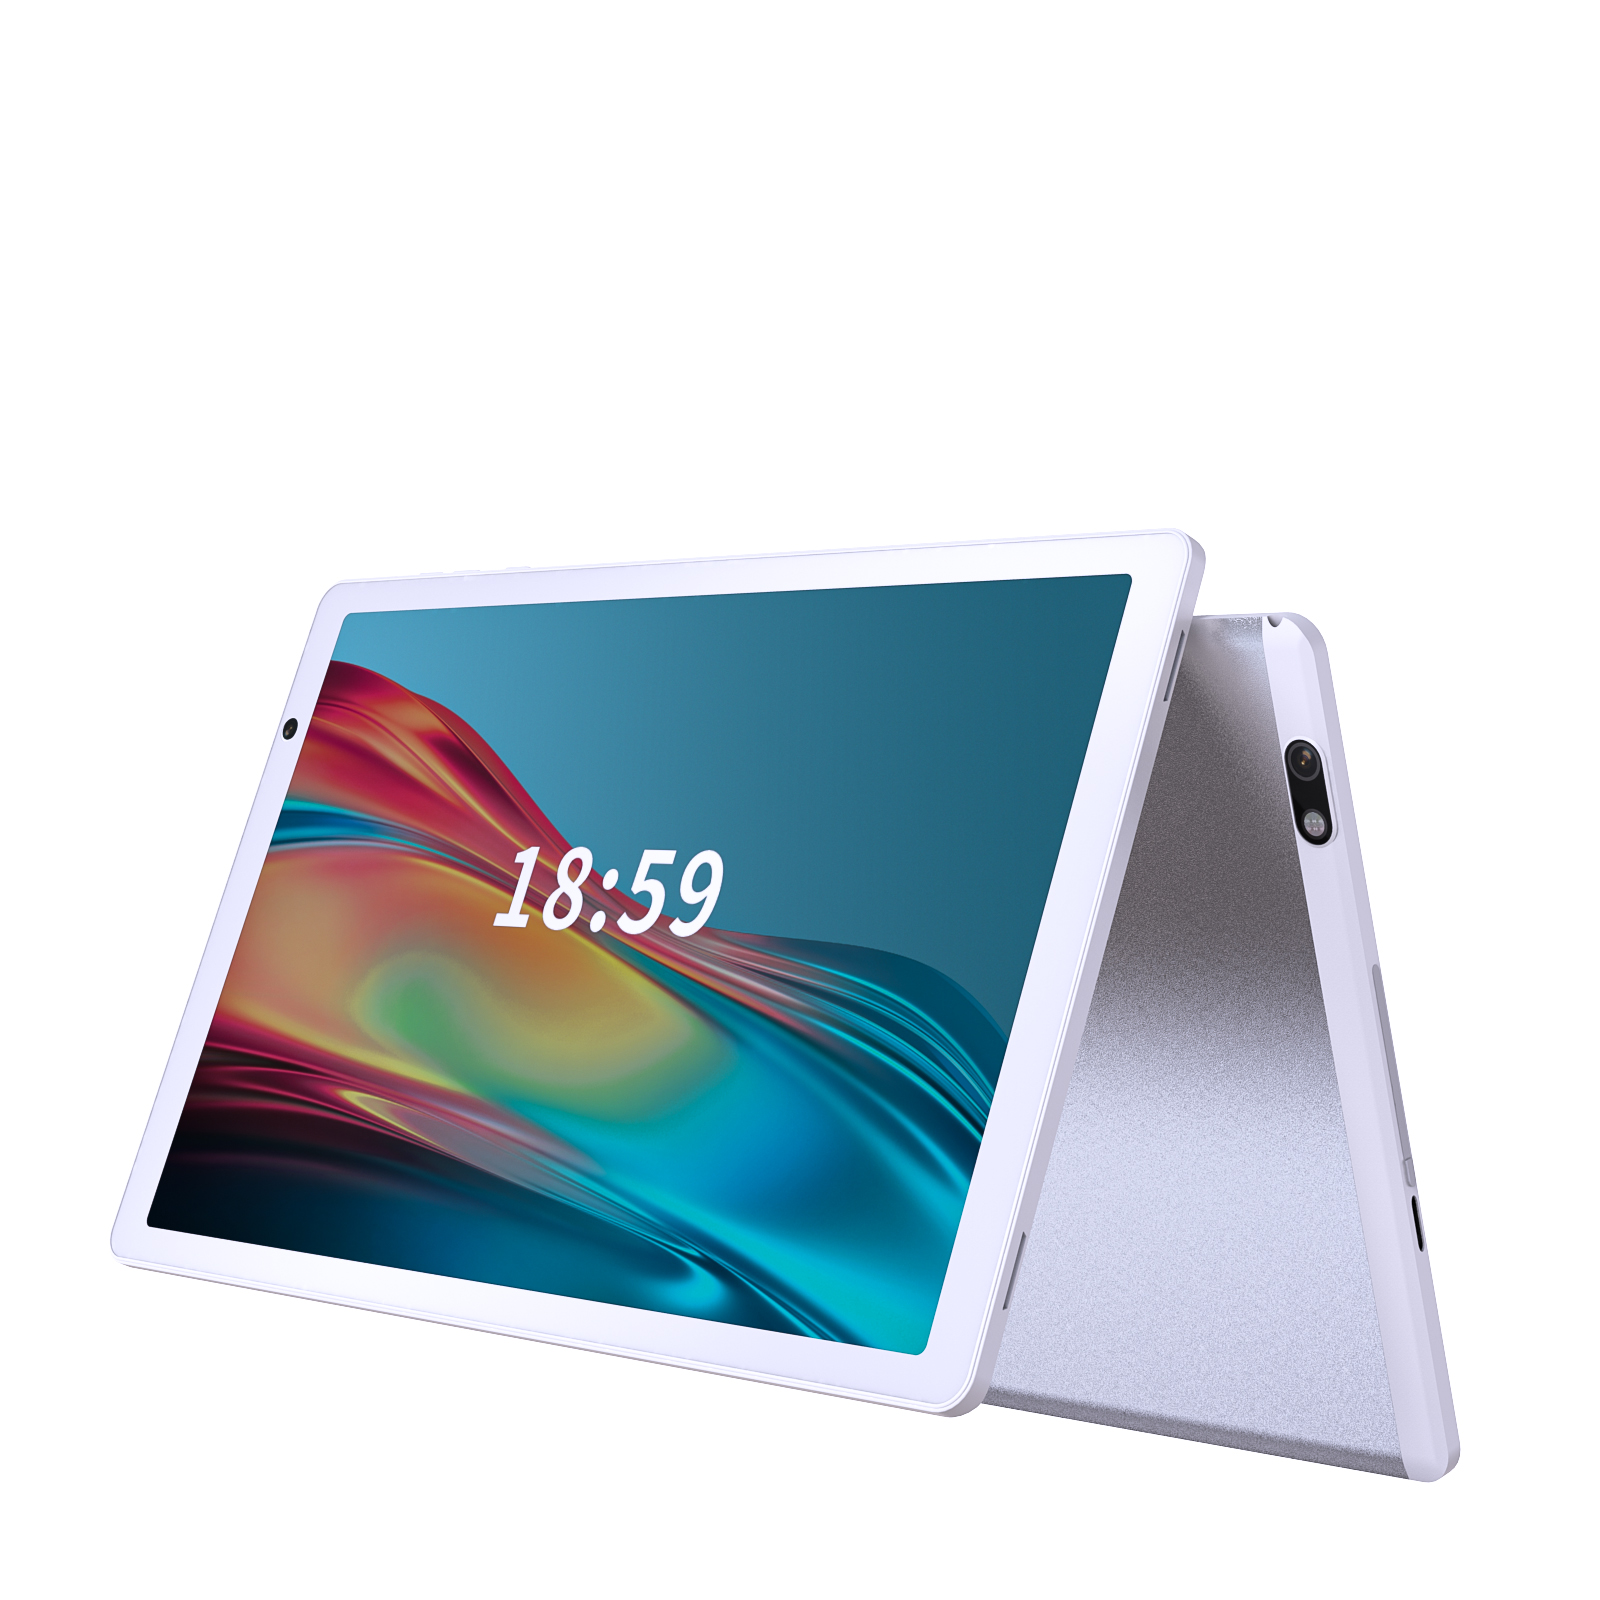 Lnmbbs 10.1 Inch 5G Tablet,Octa Core Android 10.0 Tablet 4G/64GB,WI-FI,1920*1200 IPS Bluetooth 5.0